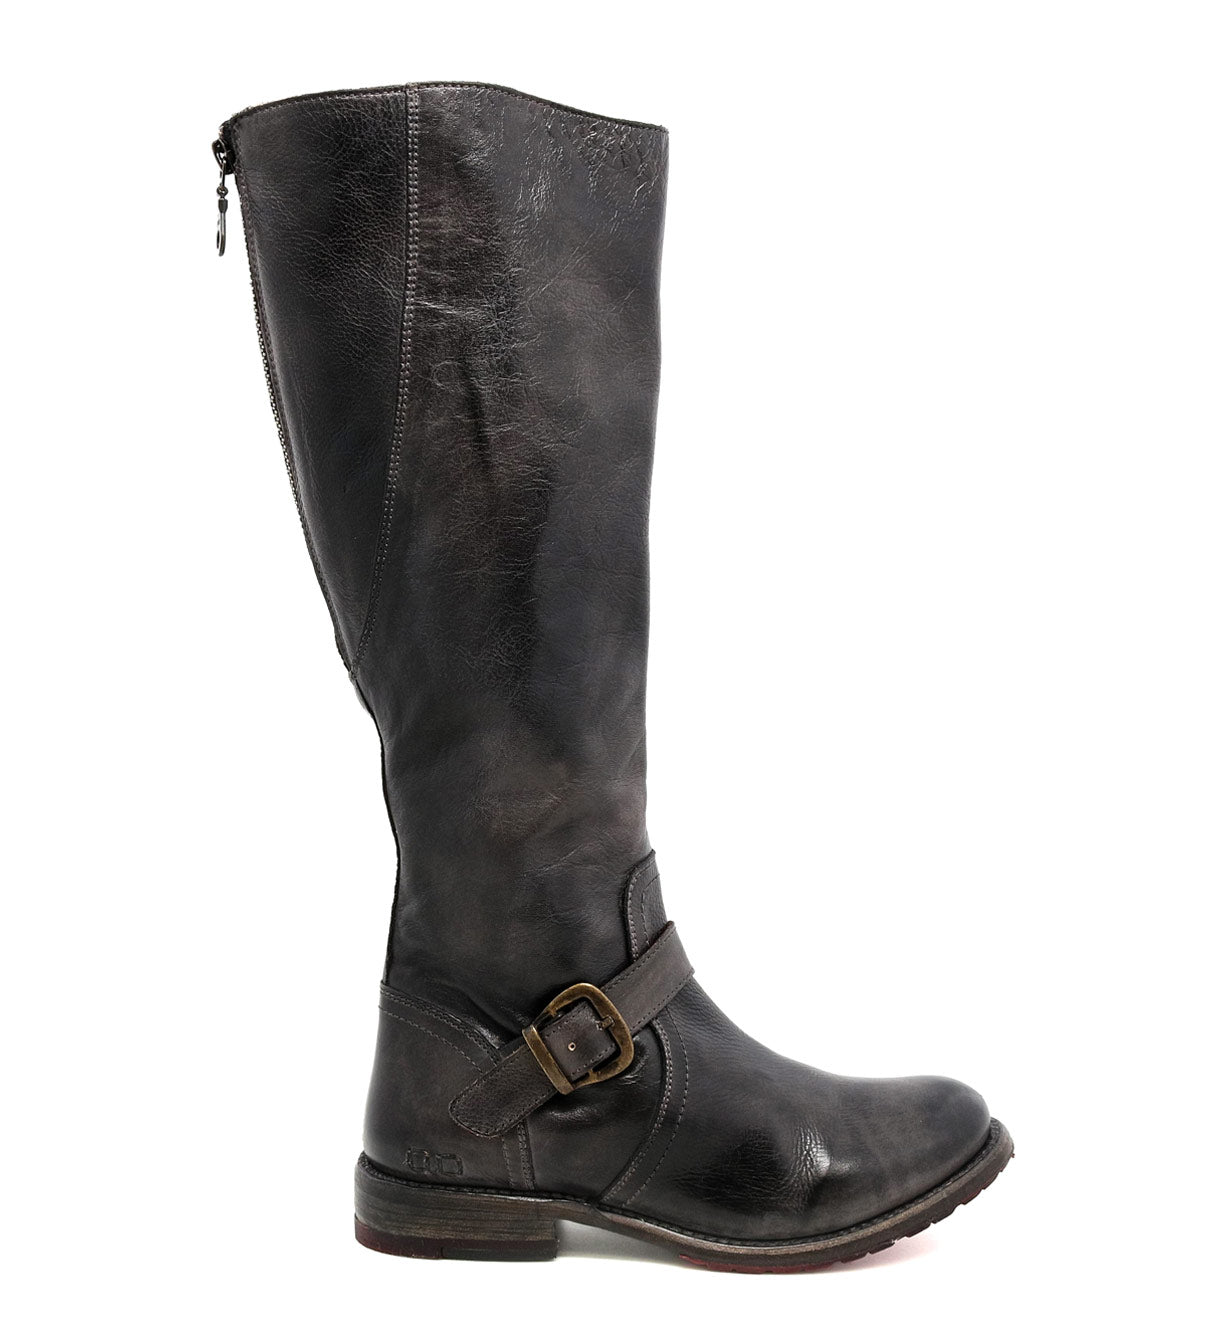 A women's Glaye grey leather riding boot with buckles by Bed Stu.